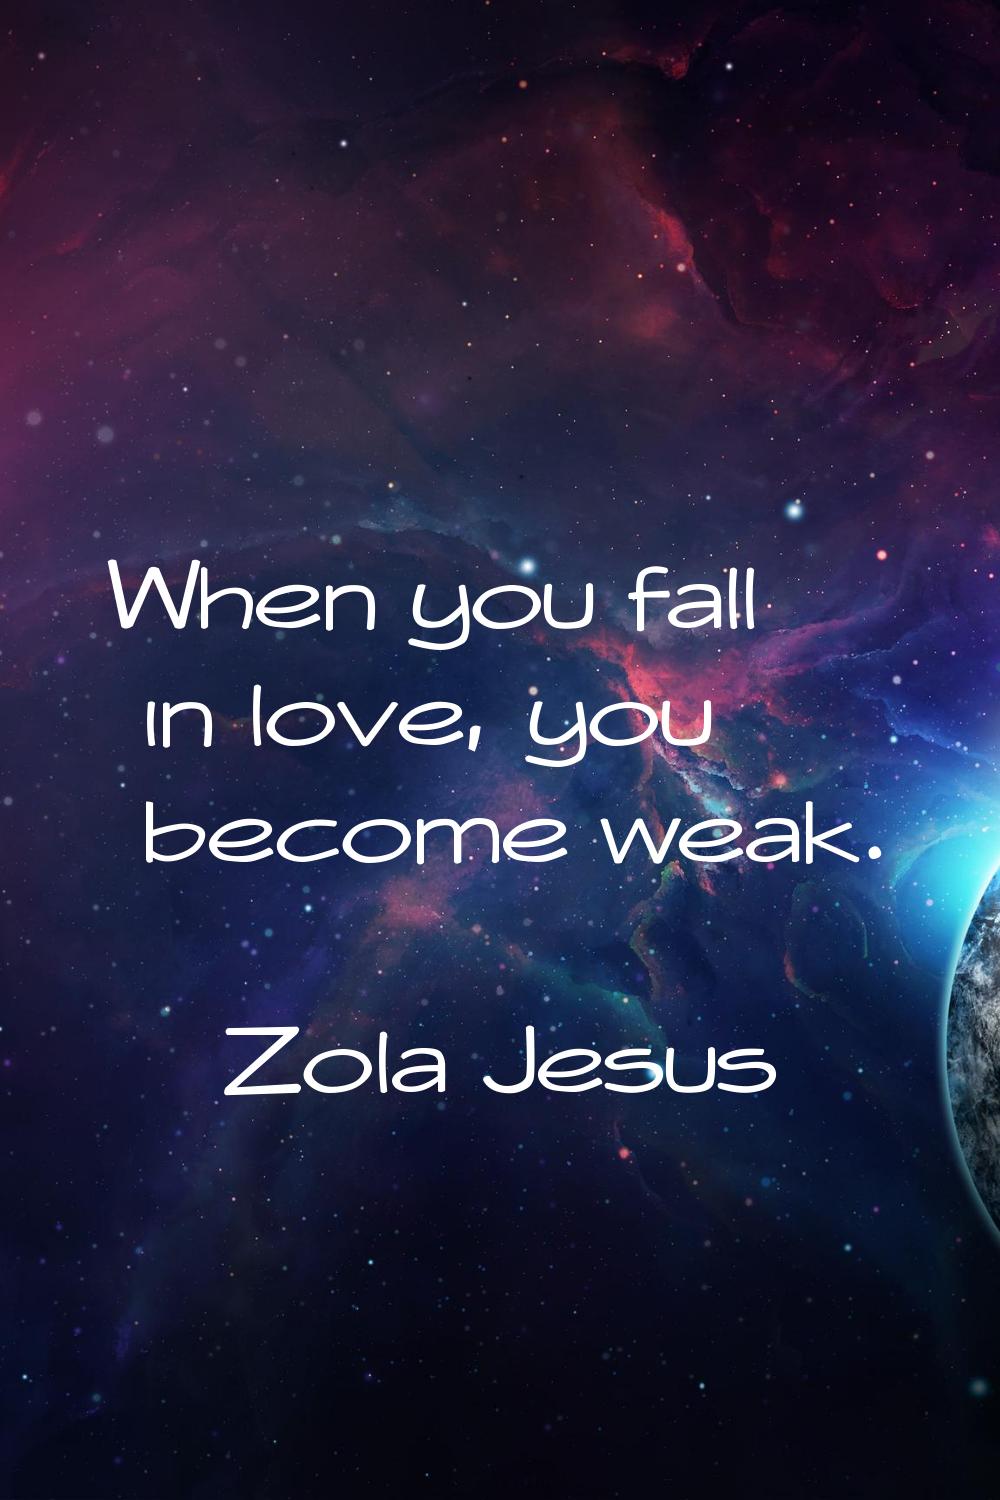 When you fall in love, you become weak.